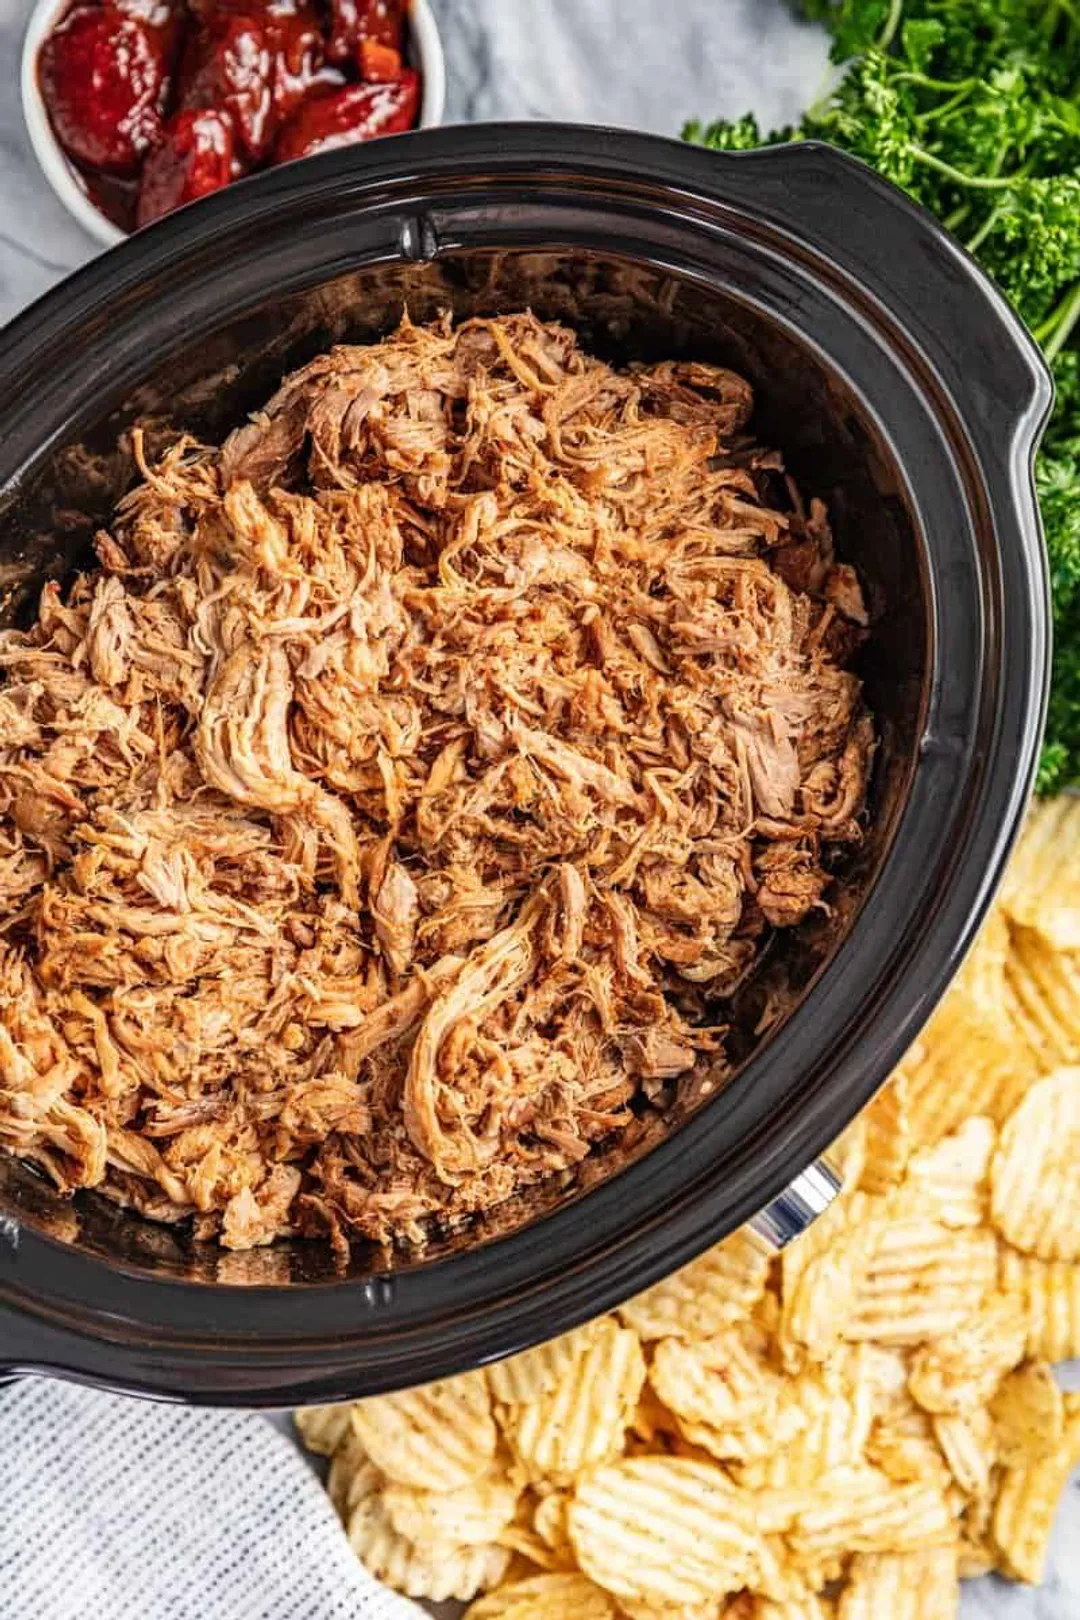 How to Reheat Pulled Pork in the Crock Pot